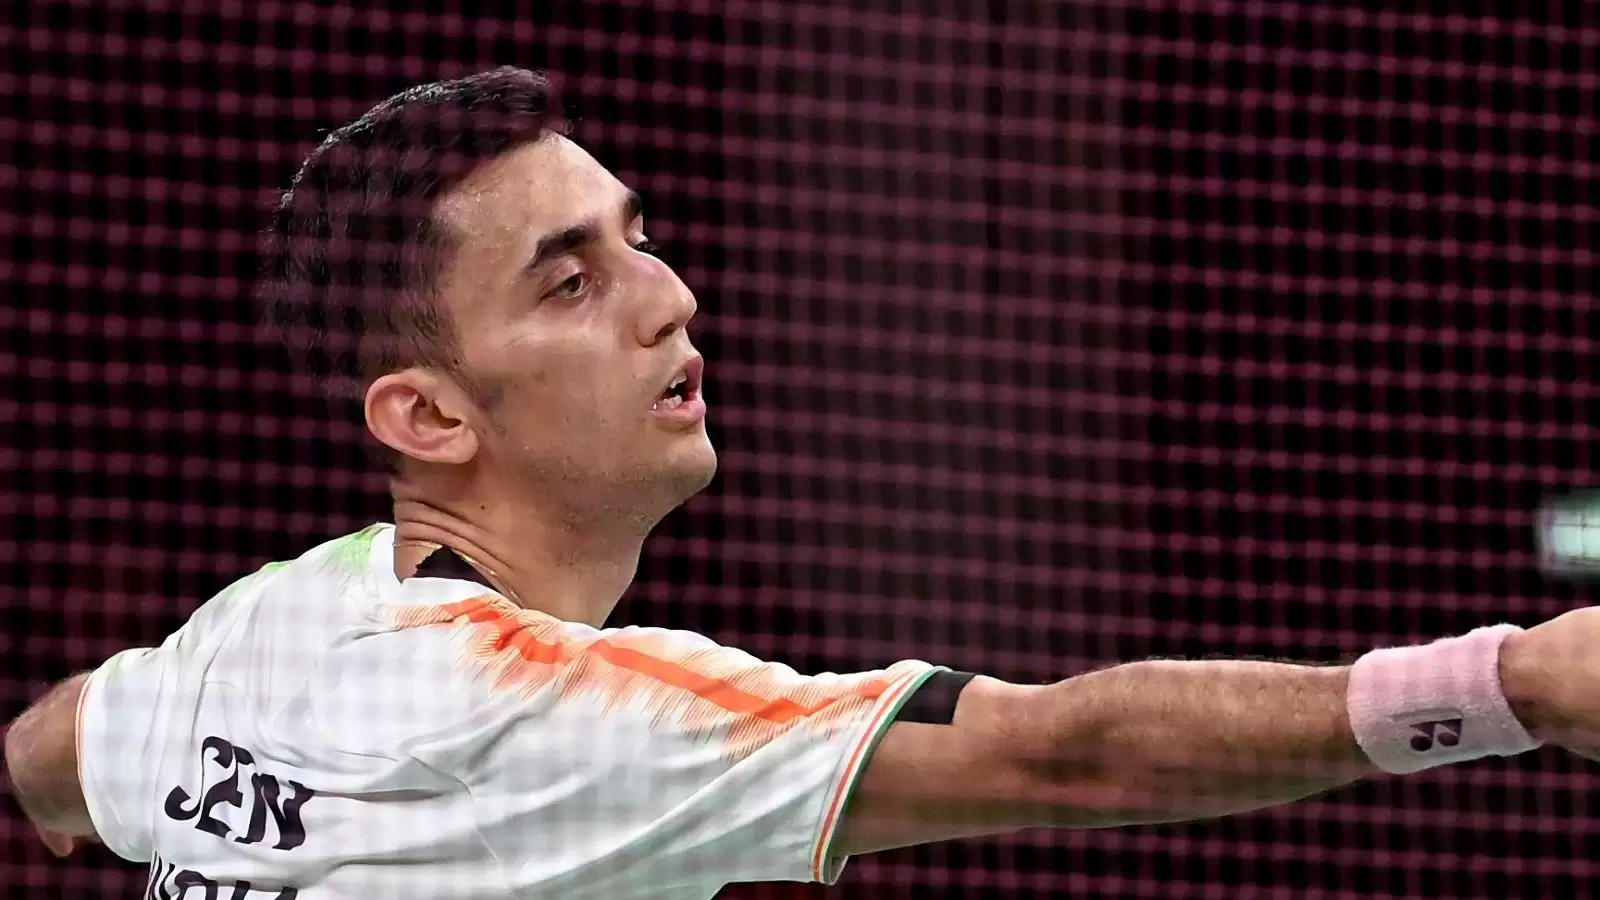 CWG 2022 Defending champions India in badminton mixed team final by defeating Singapore